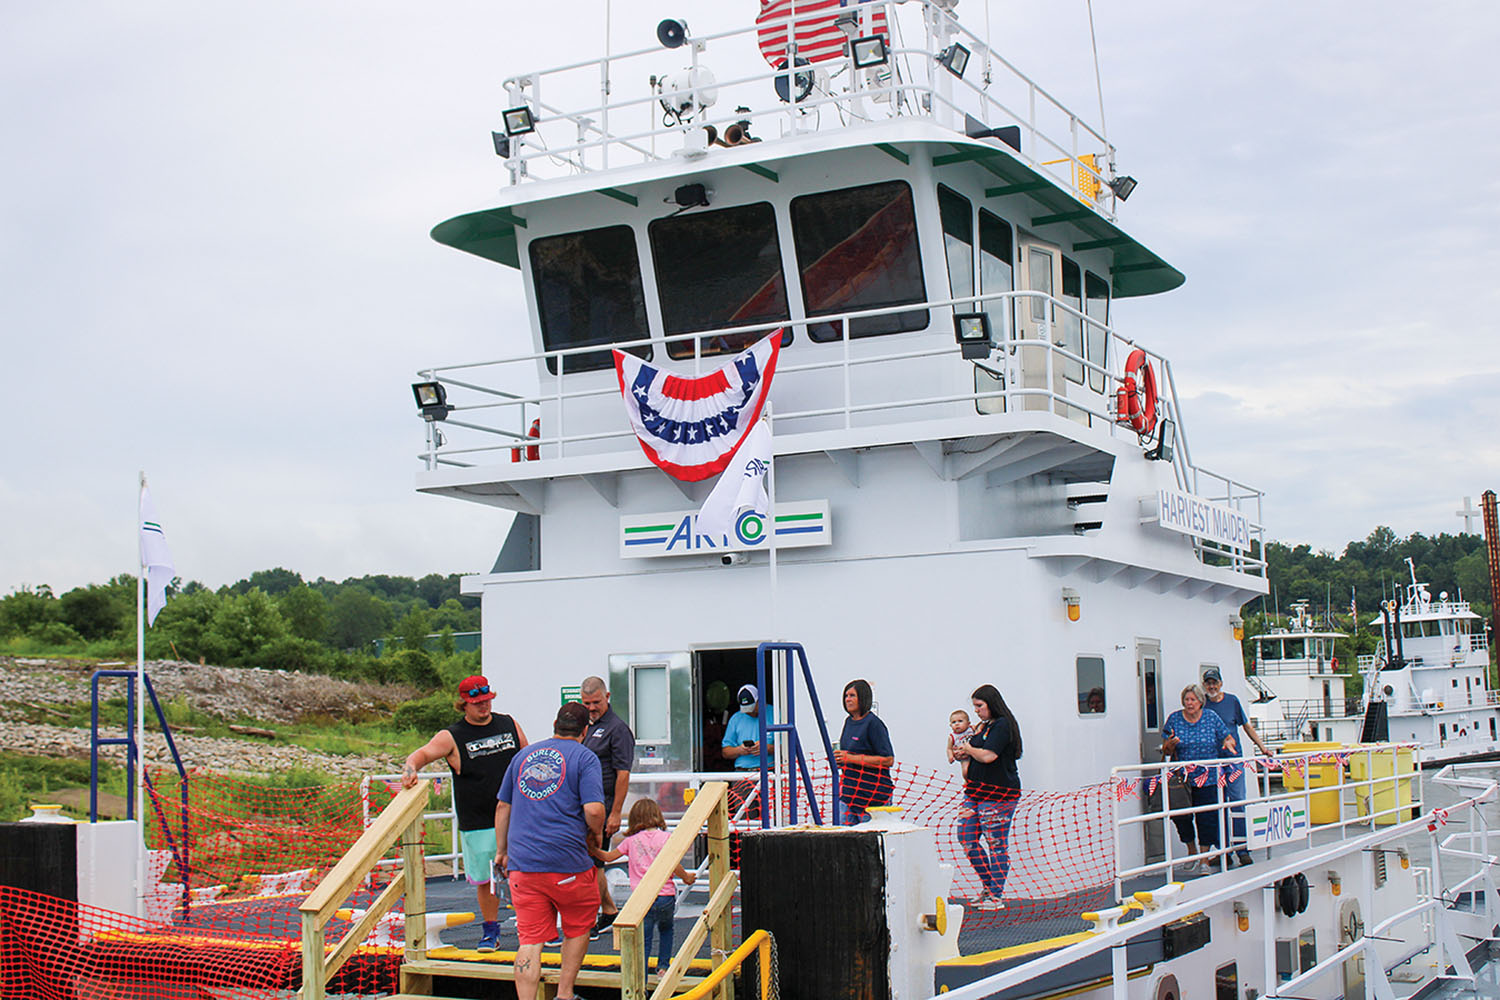 ADM/ARTCO employees, families and friends tour the mv. Harvest Maiden at PTL Marine in Wickliffe, Ky., as part of the company’s open house. (photo by Shelley Byrne)